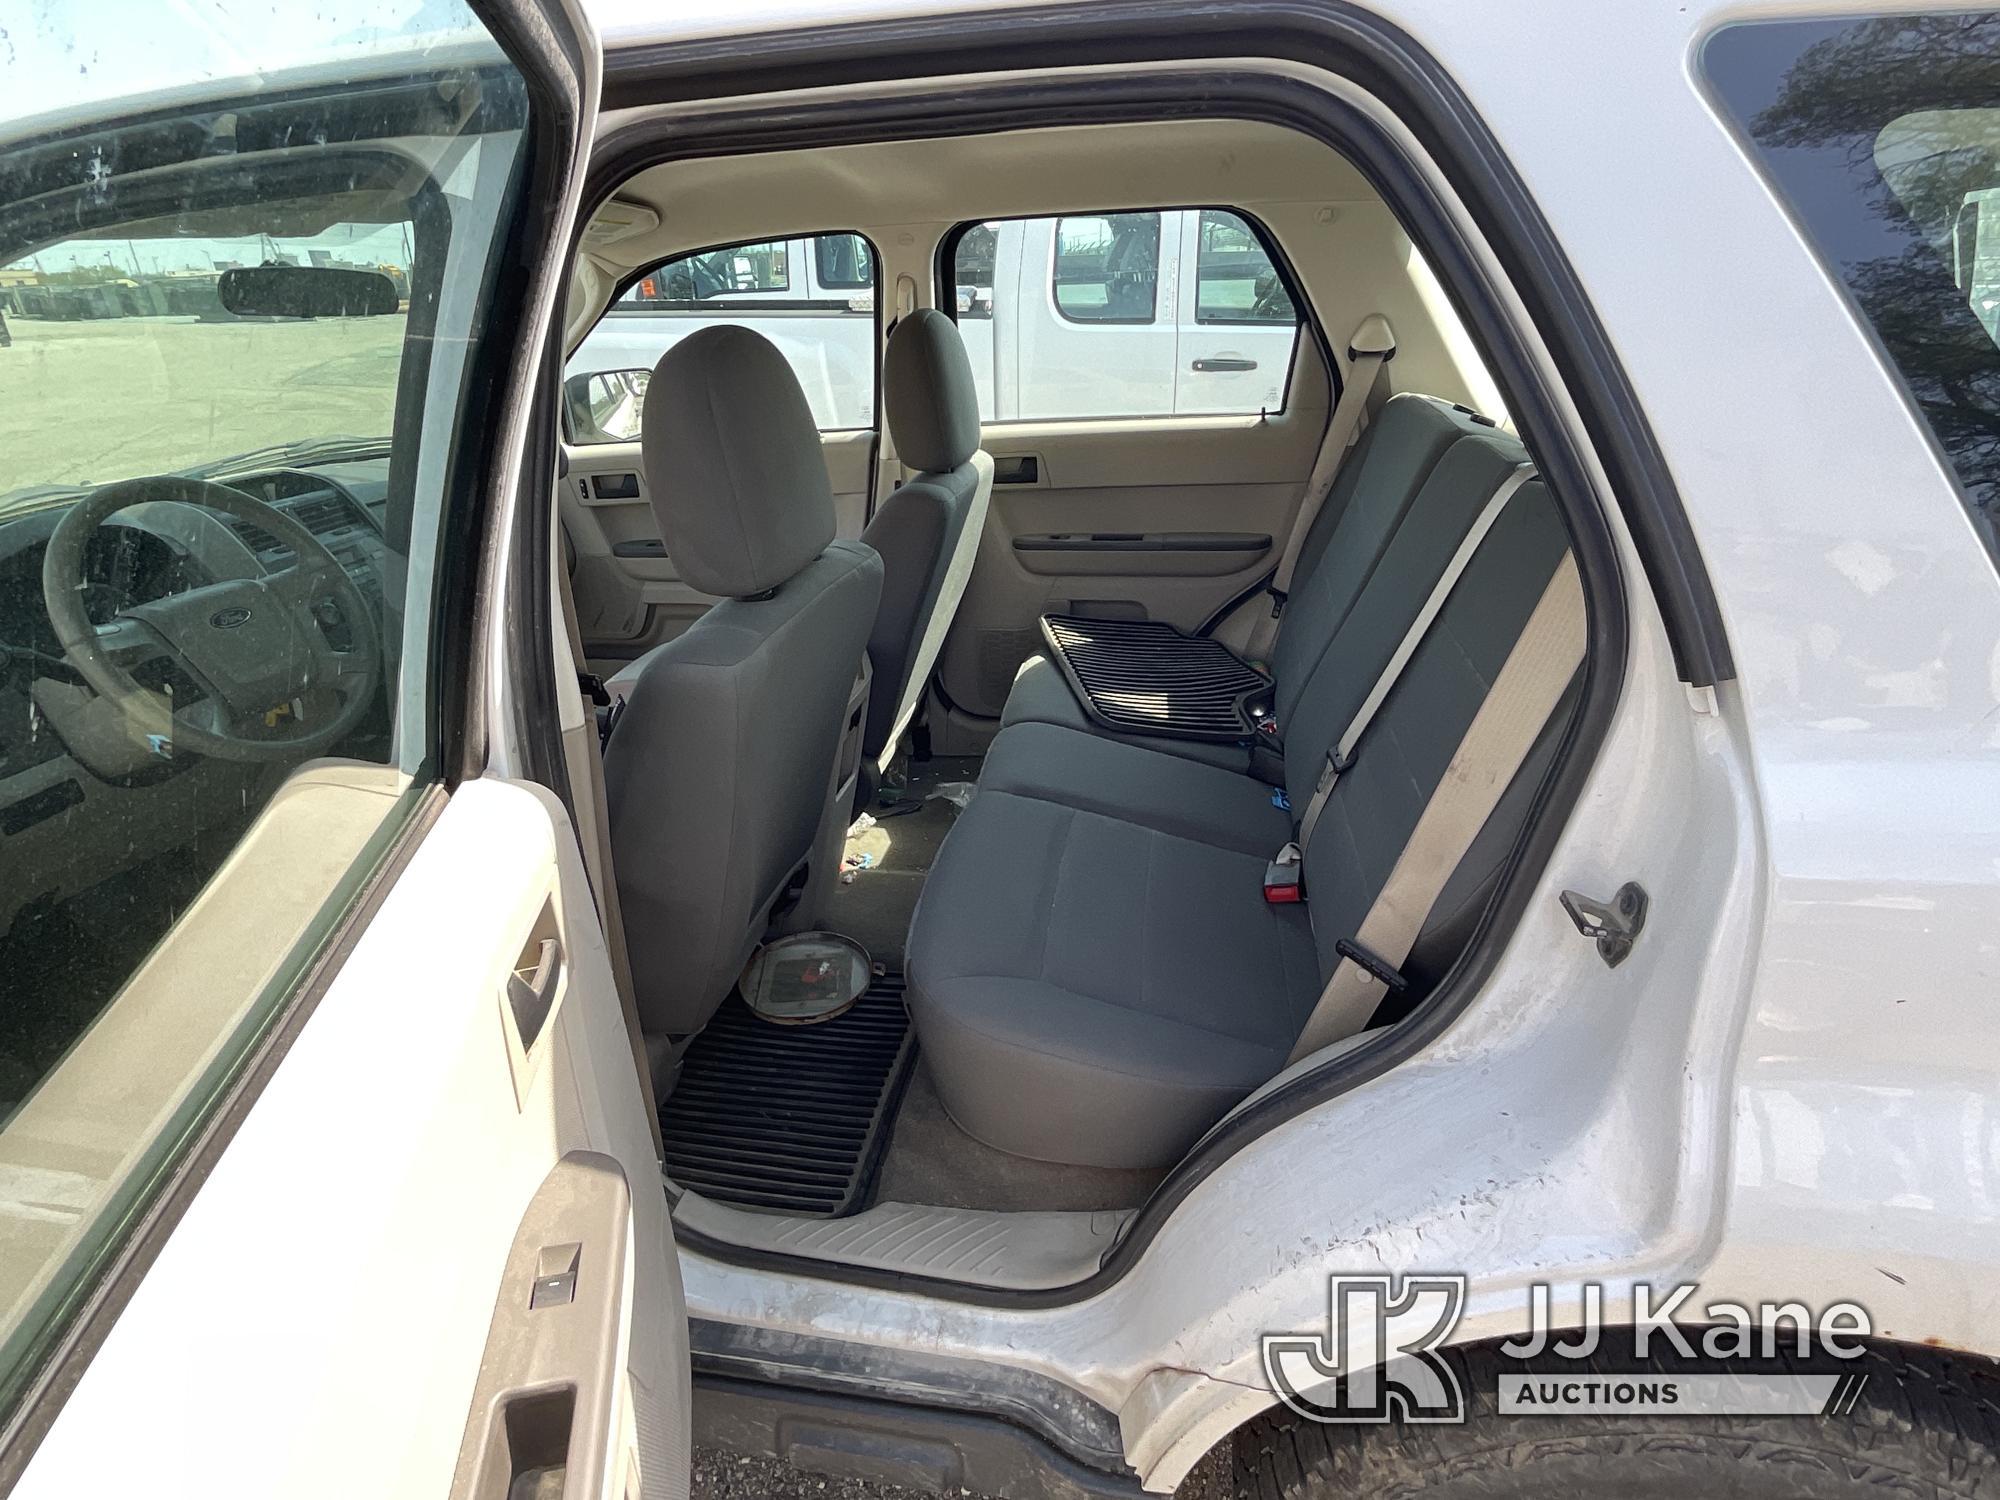 (Verona, KY) 2012 Ford Escape 4x4 4-Door Sport Utility Vehicle Runs) (Does Not Move, Seller Note: Ba